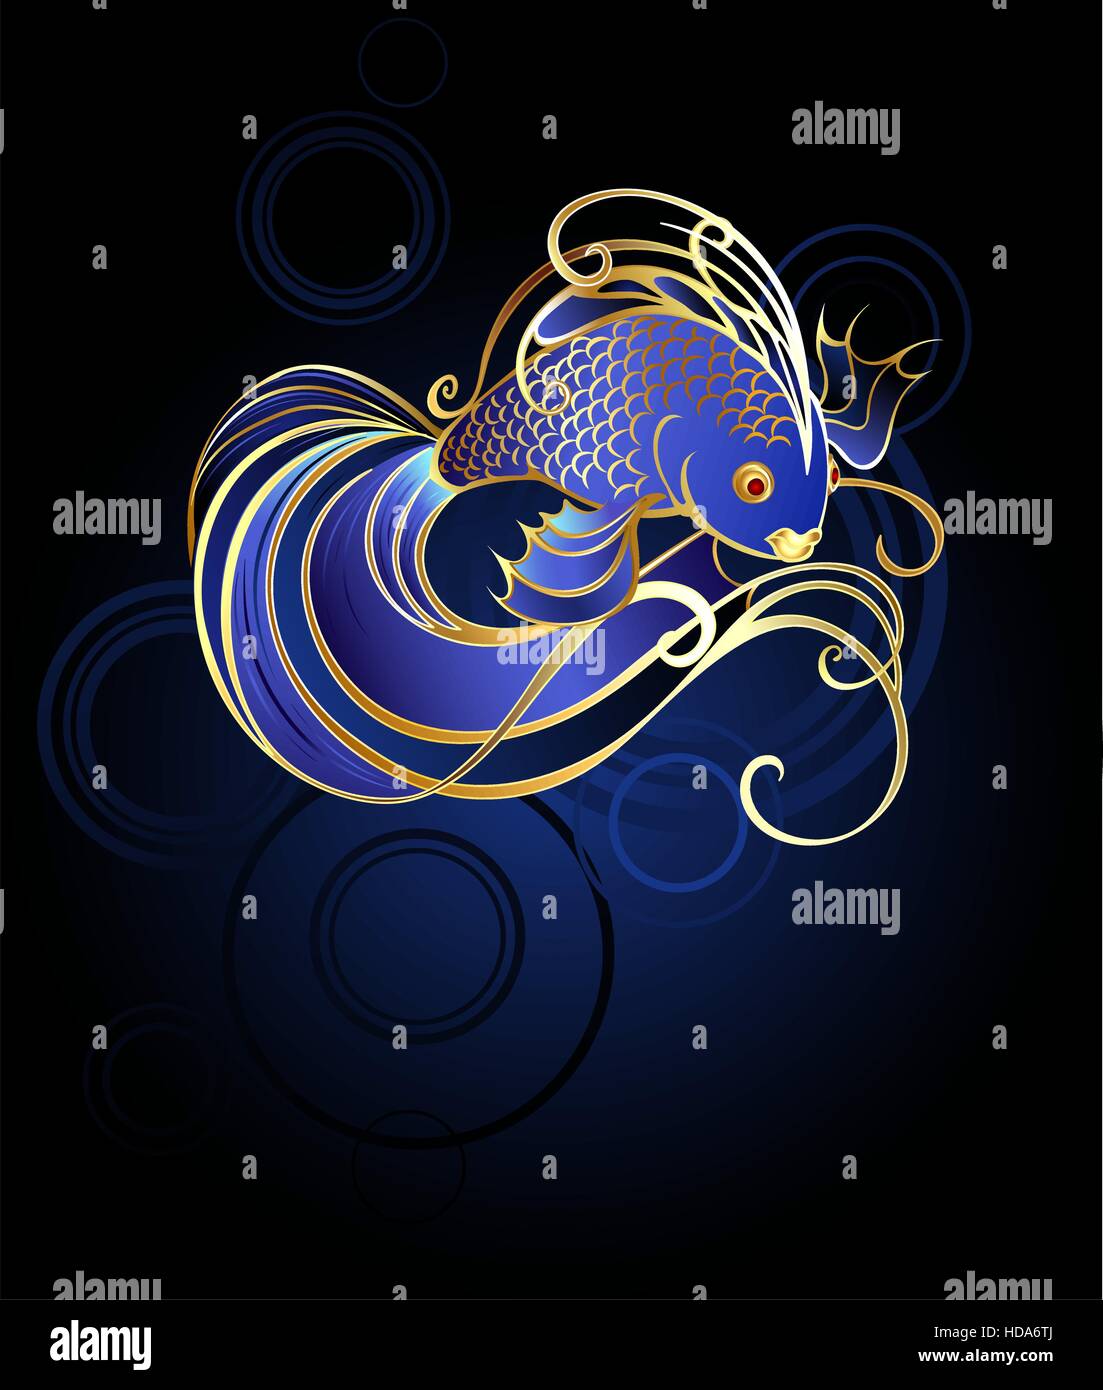 shiny, jewelry, gold fish with a beautiful long tail and fins on a blue background. Stock Vector